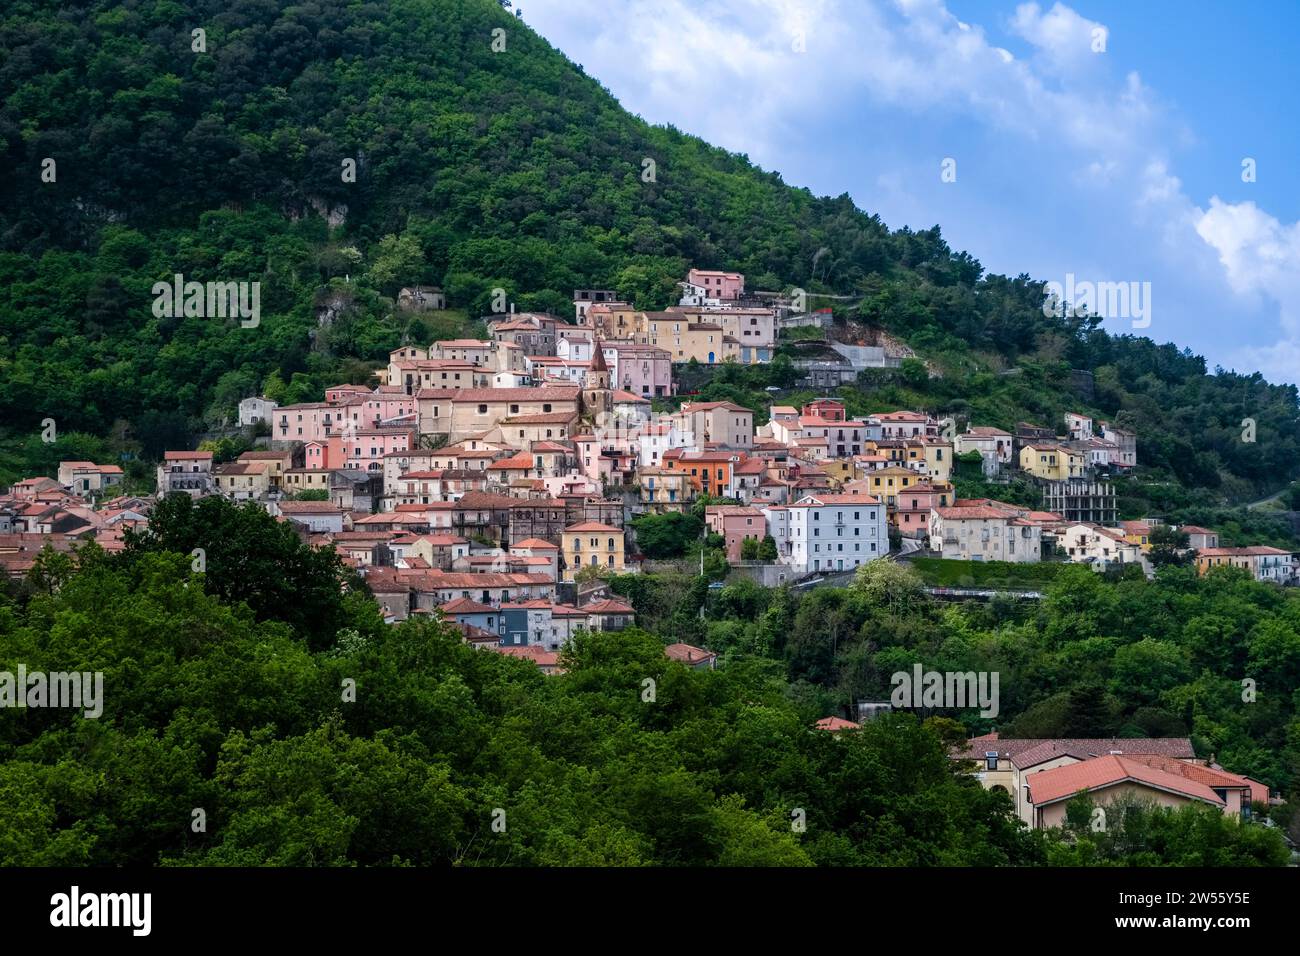 The houses of the small town of Trecchina, situated on the slope of a wooded hill. Stock Photo